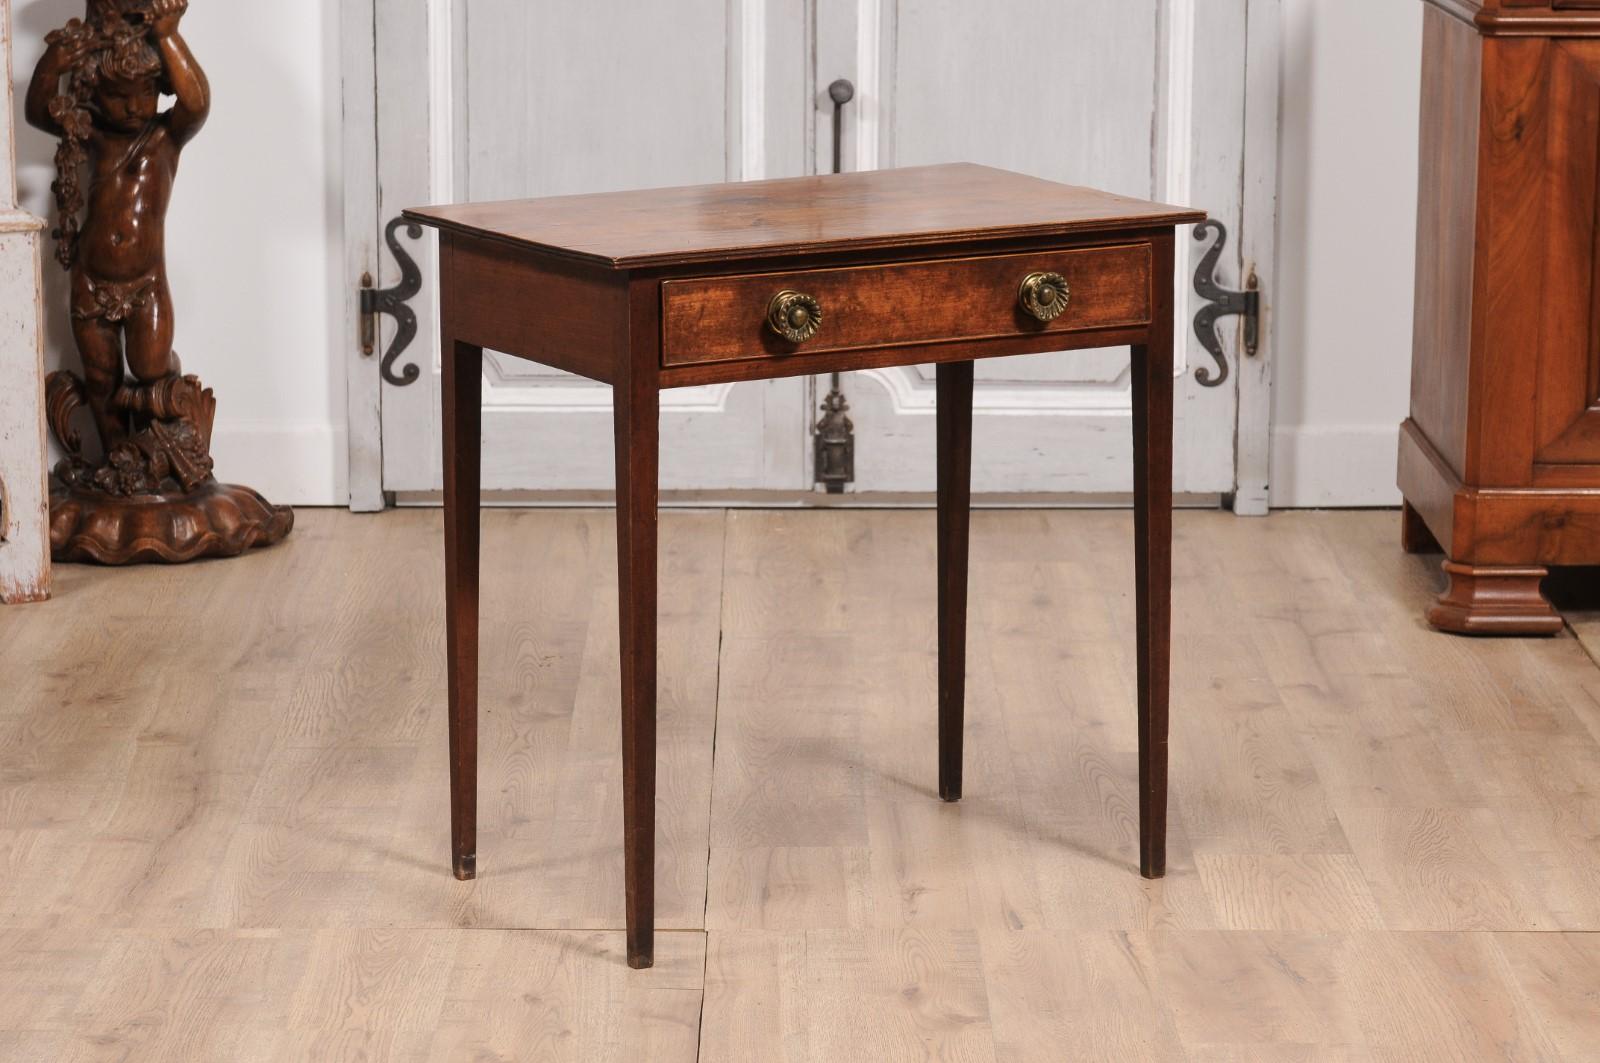 English Georgian Period 18th Century Fruitwood Side Table with Single Drawer In Good Condition For Sale In Atlanta, GA